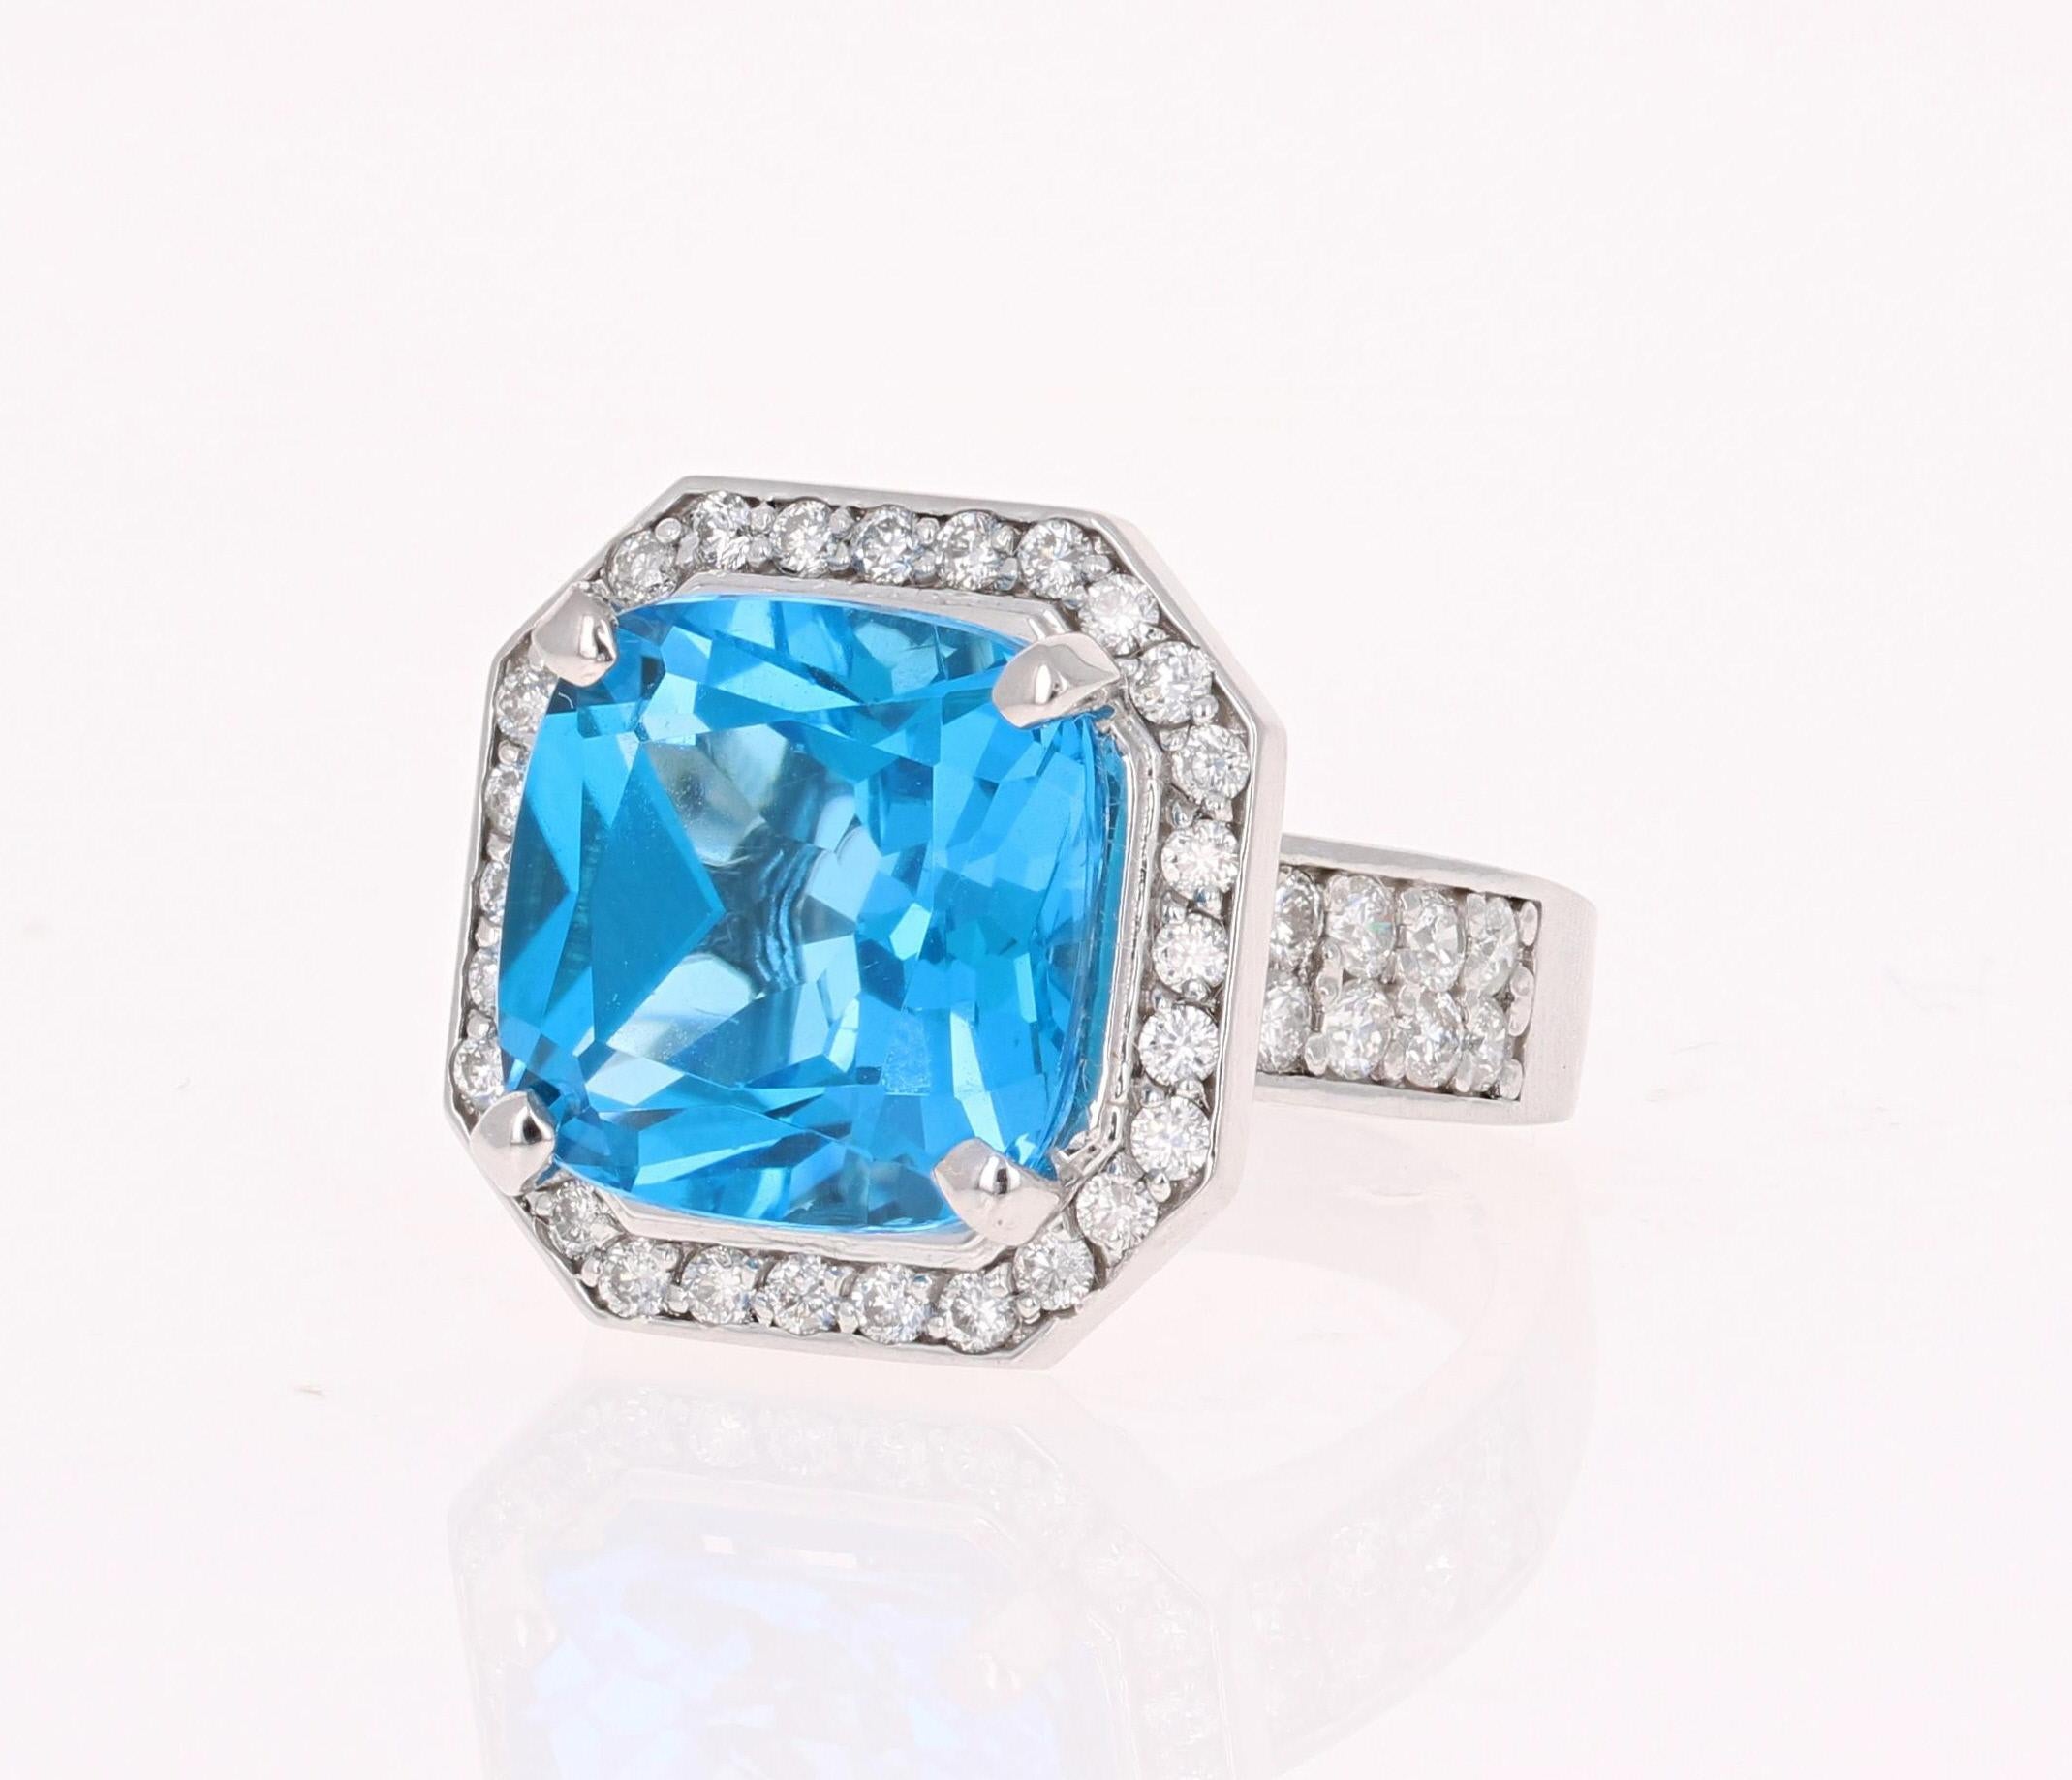 This beautiful Emerald cut Blue Topaz and Diamond ring has a stunningly large Blue Topaz that weighs 11.80 Carats. It is surrounded by 44 Round Cut Diamonds that weigh 1.12 Carats. The total carat weight of the ring is 12.92 Carats. 
The setting is